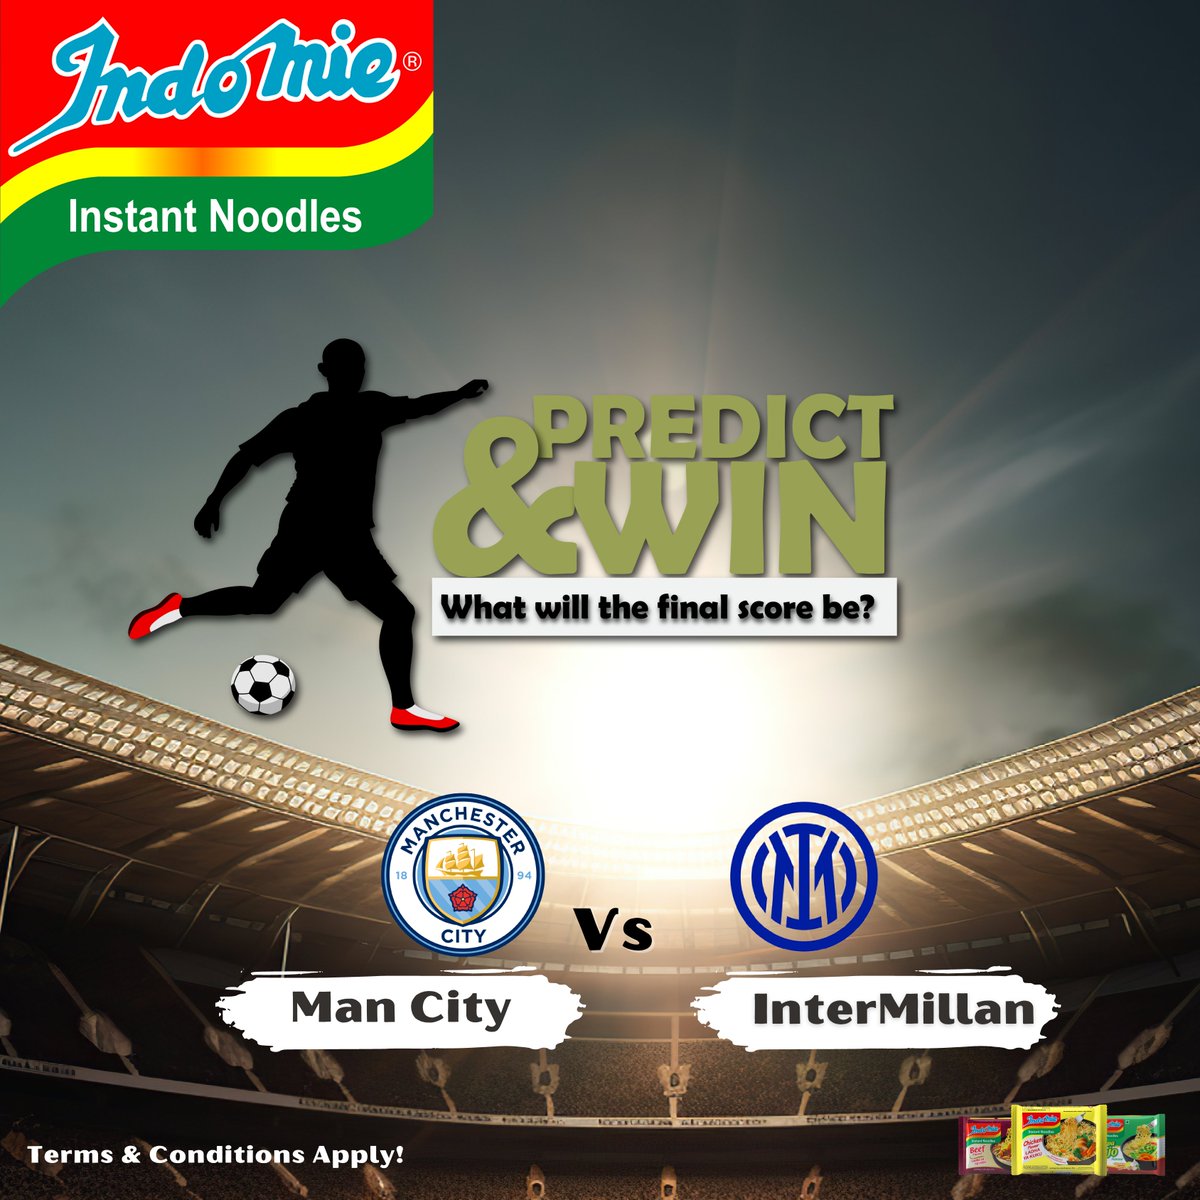 Stand a chance to bag the full Indomie soccer goodness. ⚽️🥳
Who will win the game and by how many goals?
After the match on Saturday, June 10th. 𝐎𝐍𝐋𝐘 𝟒 correct predictions will be randomly selected and awarded. Itambe!!!
#predictandwin #indomieMautam #indomieKenya